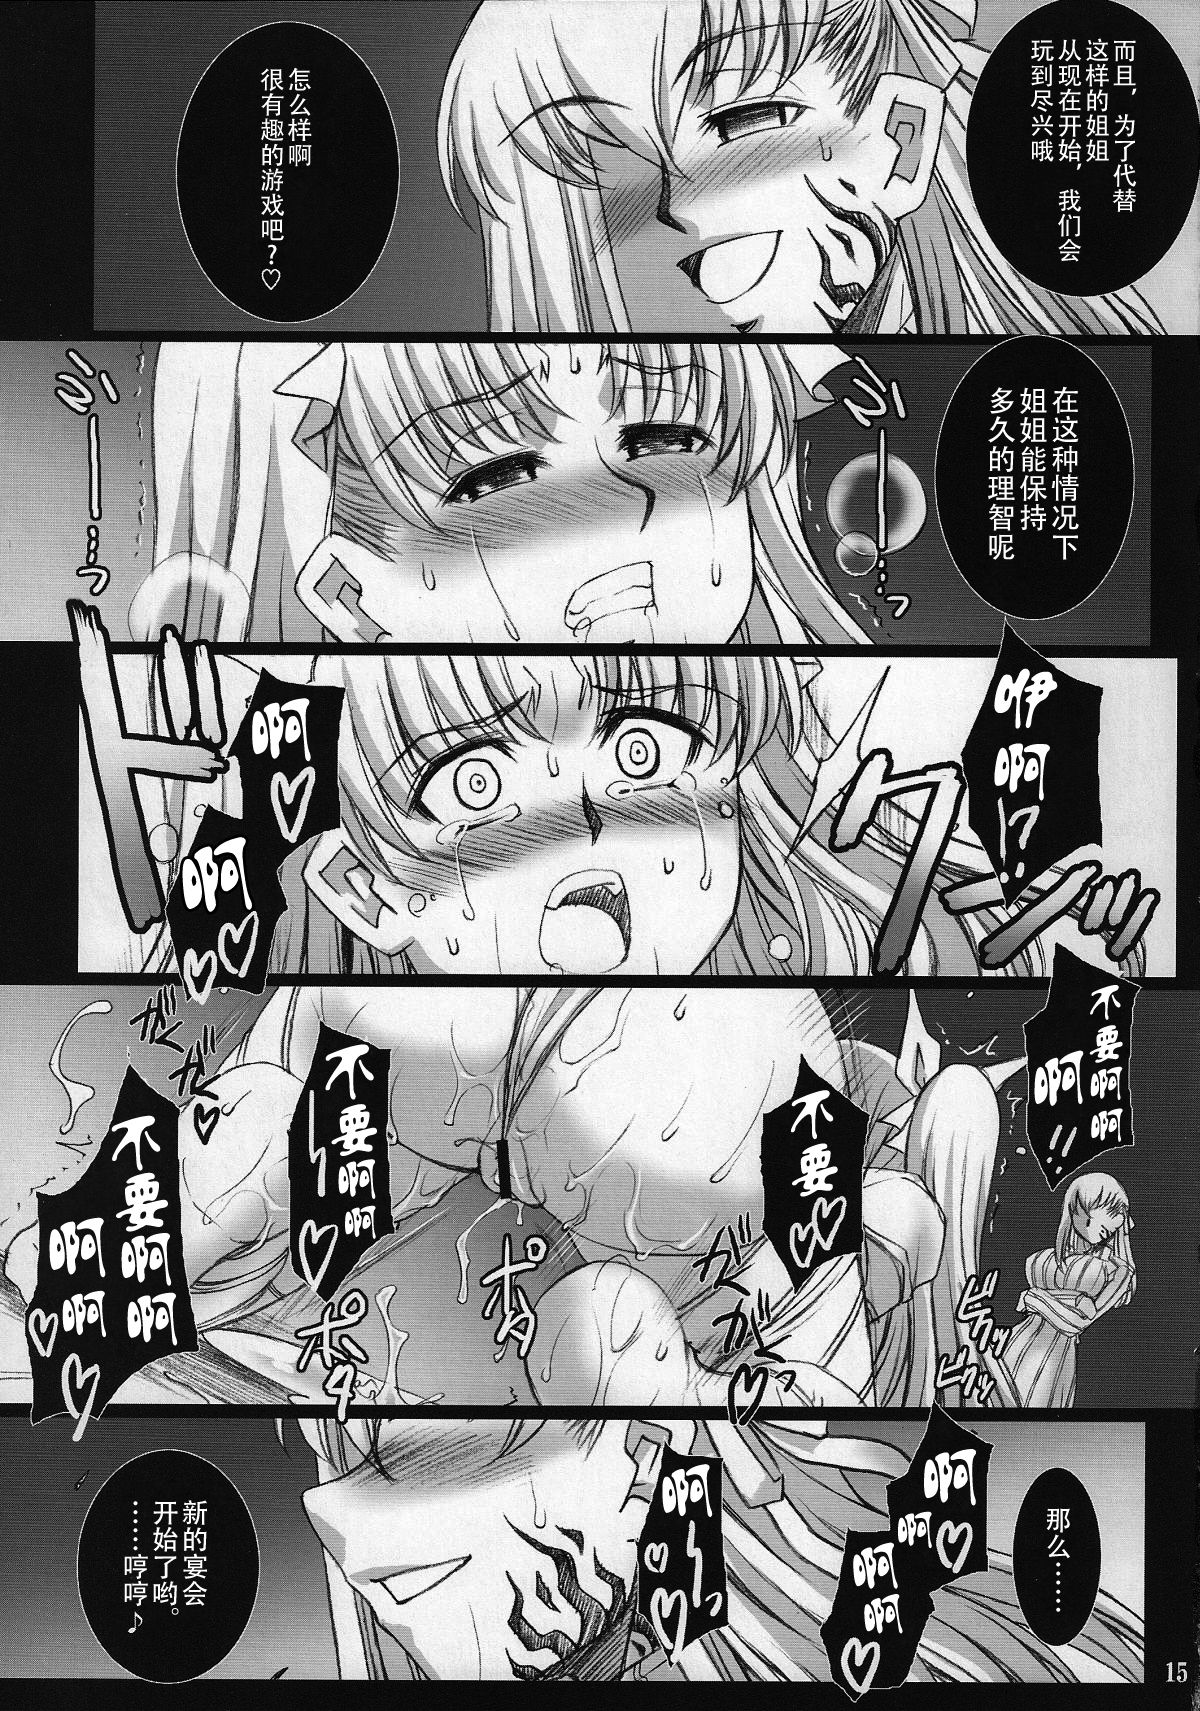 (COMIC1☆2) [H.B (B-RIVER)] Red Degeneration -DAY/3- (Fate/stay night) [Chinese] [不咕鸟汉化组] (COMIC1☆2) [H・B (B-RIVER)] Red Degeneration -DAY/3- (Fate/stay night) [中国翻訳]